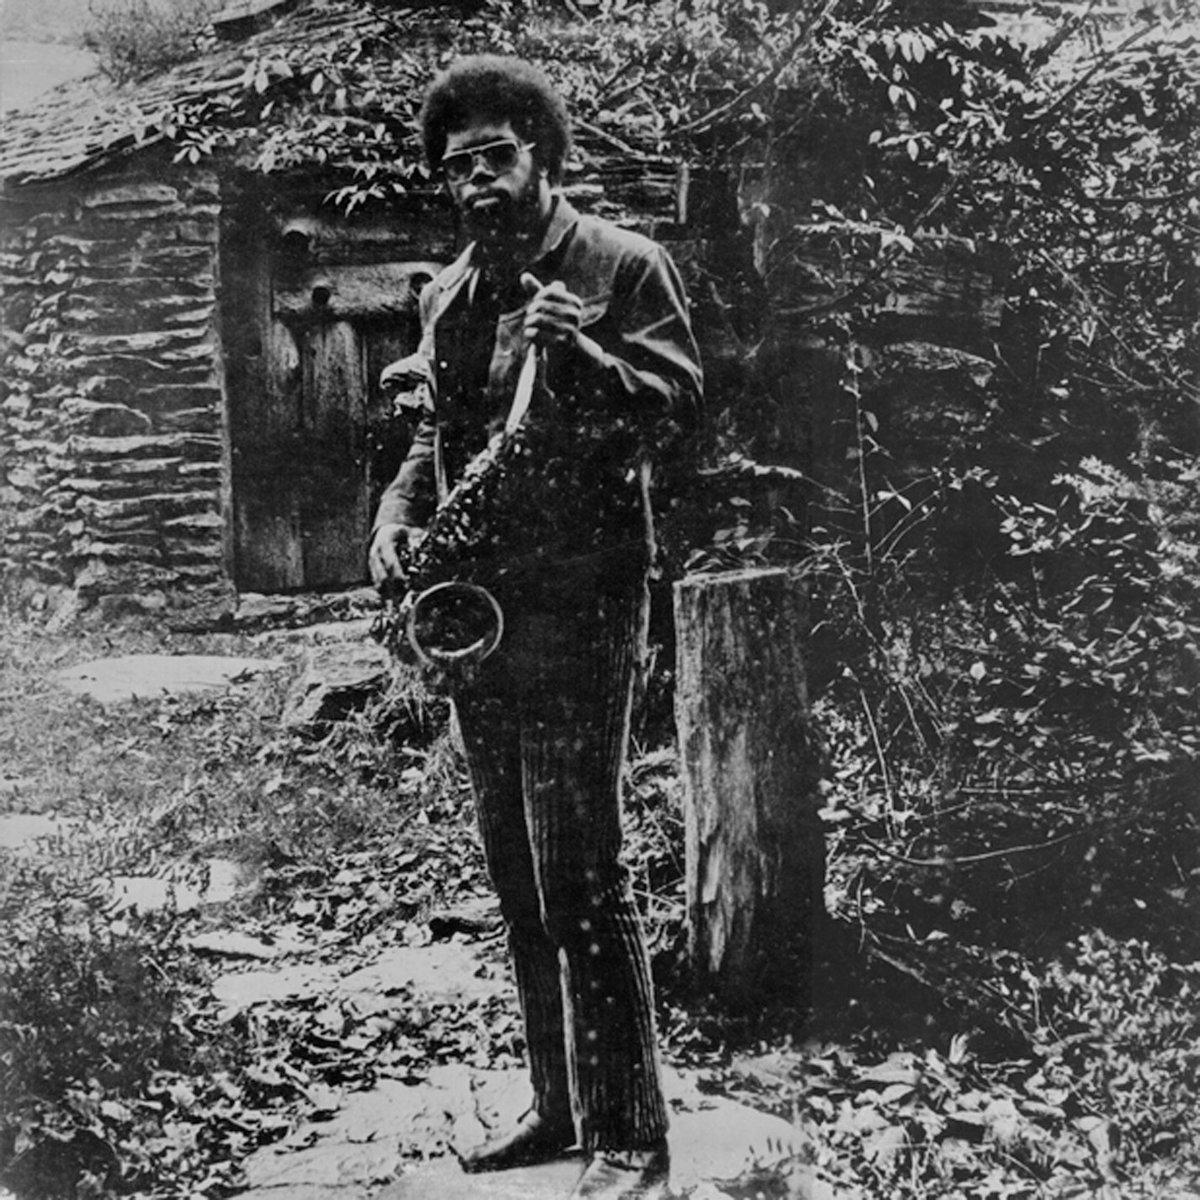 #nowplaying Joe McPhee 'Nation Time' - unimpeachable brilliance. Nice to be able to buy this digitally via the Catalytic Sound co-operative, some amazing gear on there. Bandcamp link here: joemcphee.bandcamp.com/album/nation-t…